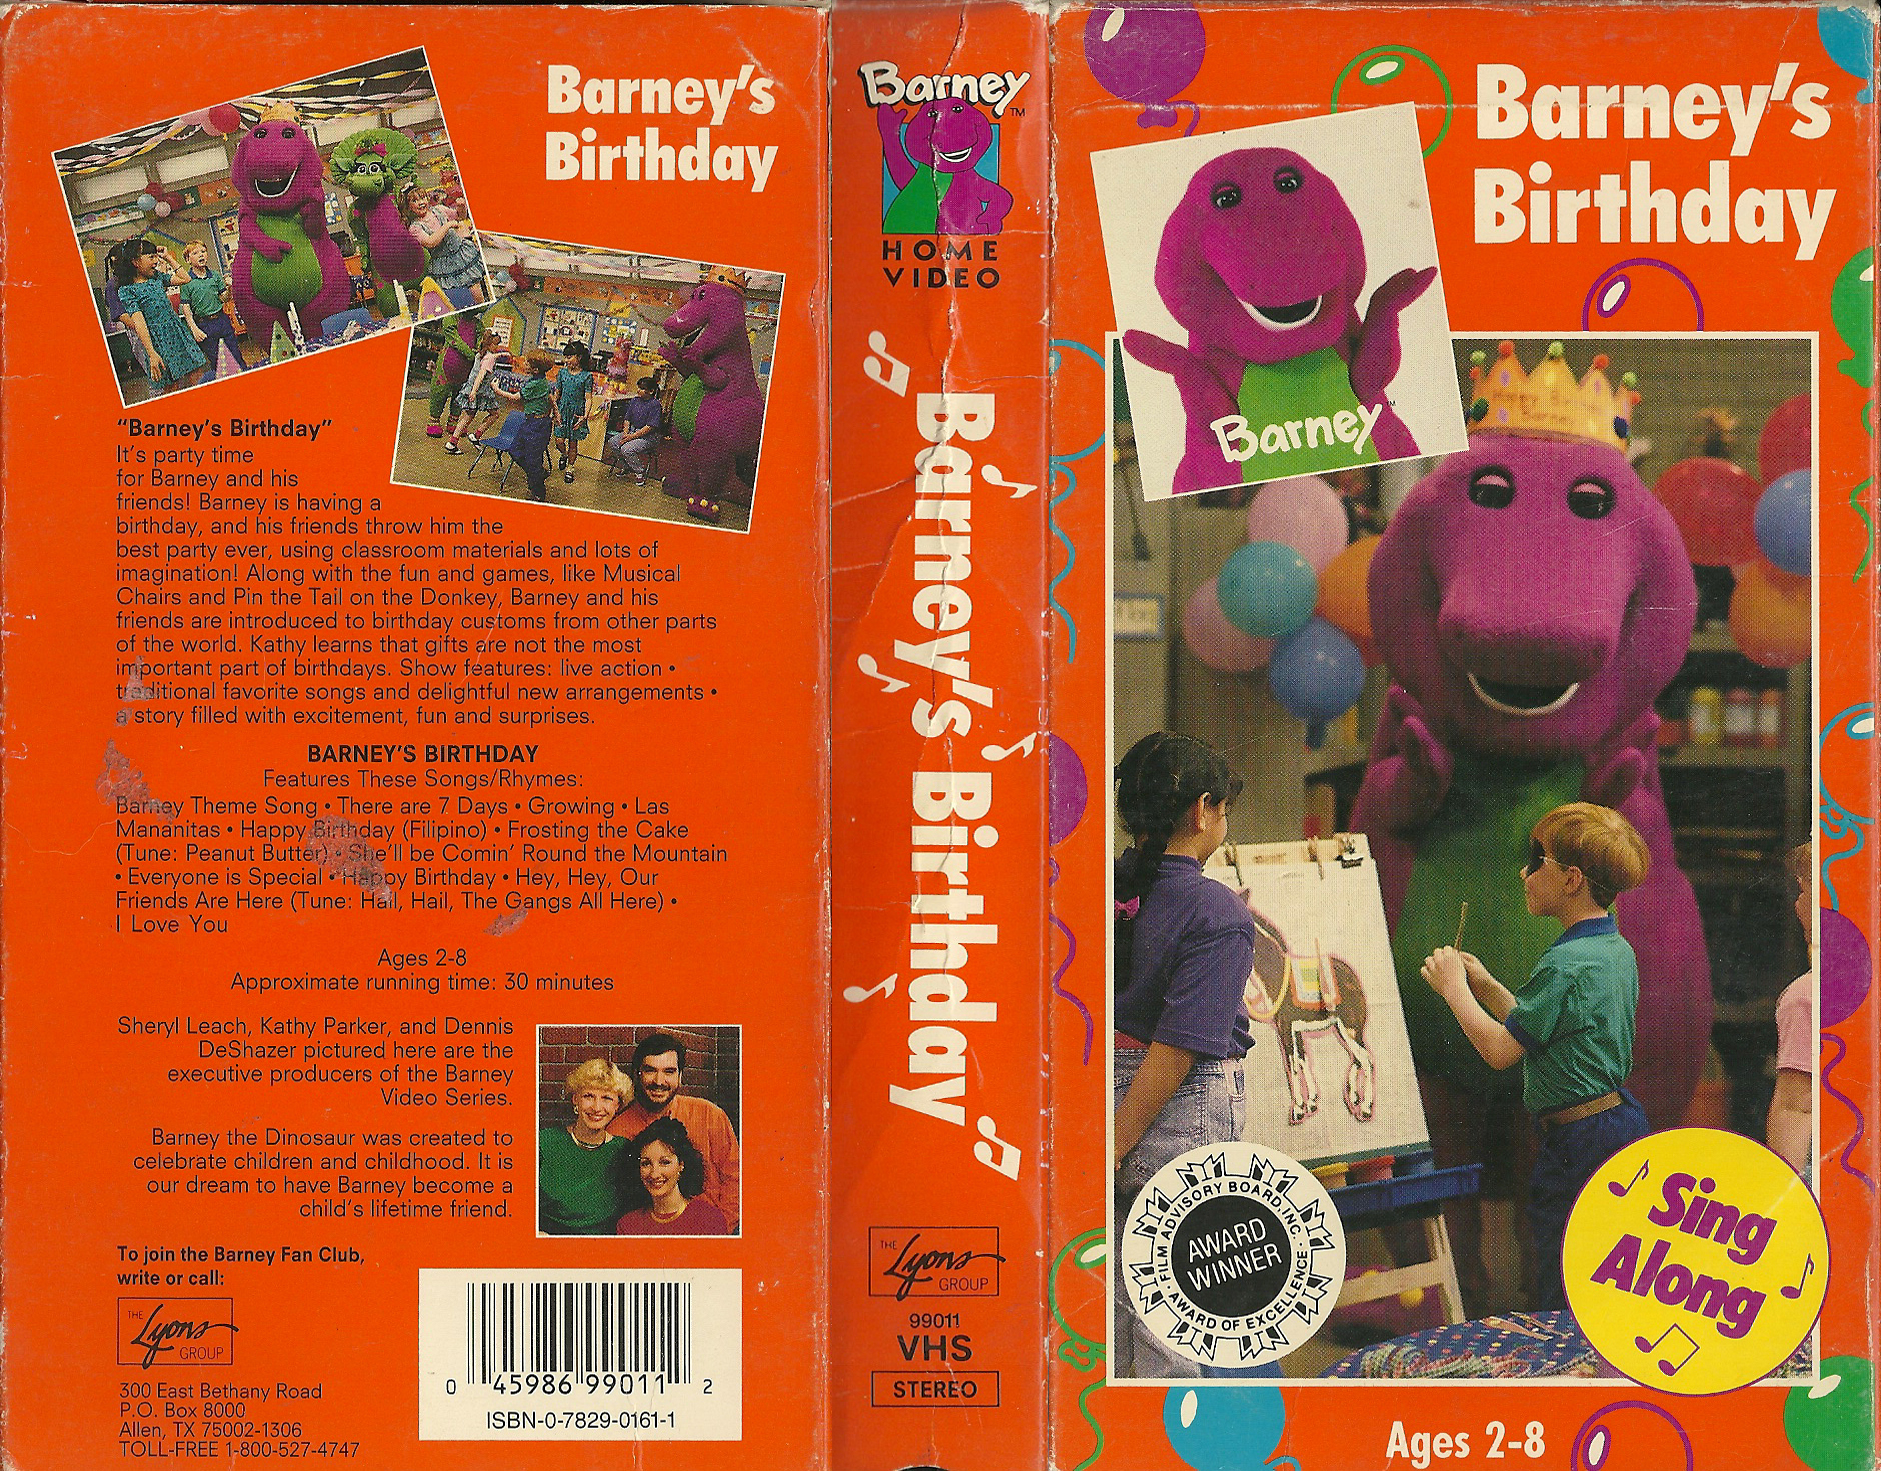 May 14 2011 VHS cover scan - click for high res version barney's birth...